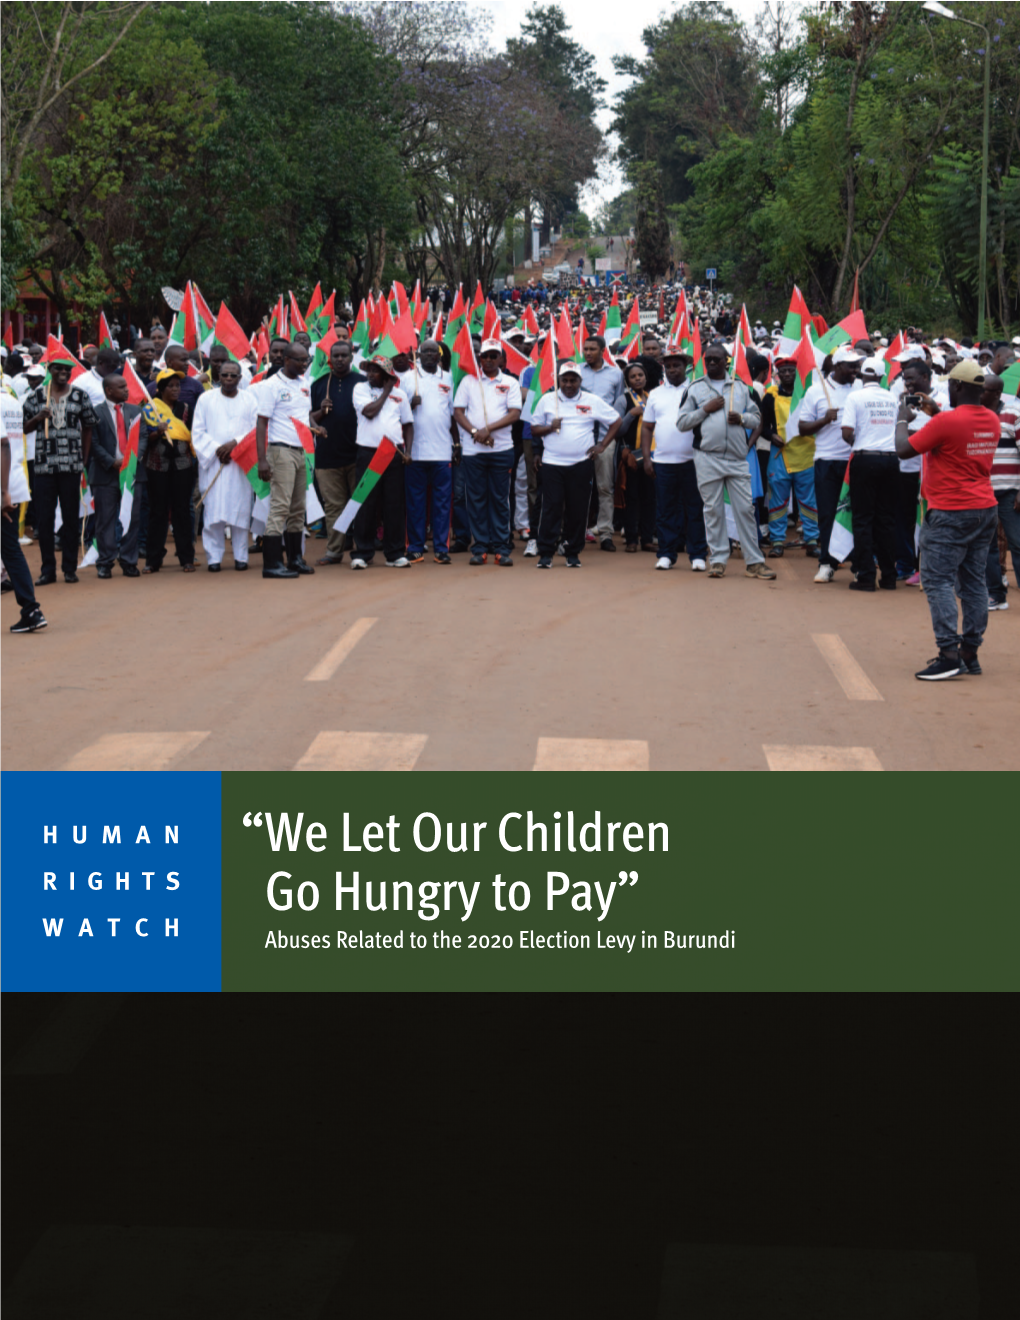 We Let Our Children Go Hungry to Pay” Abuses Related to the 2020 Election Levy in Burundi